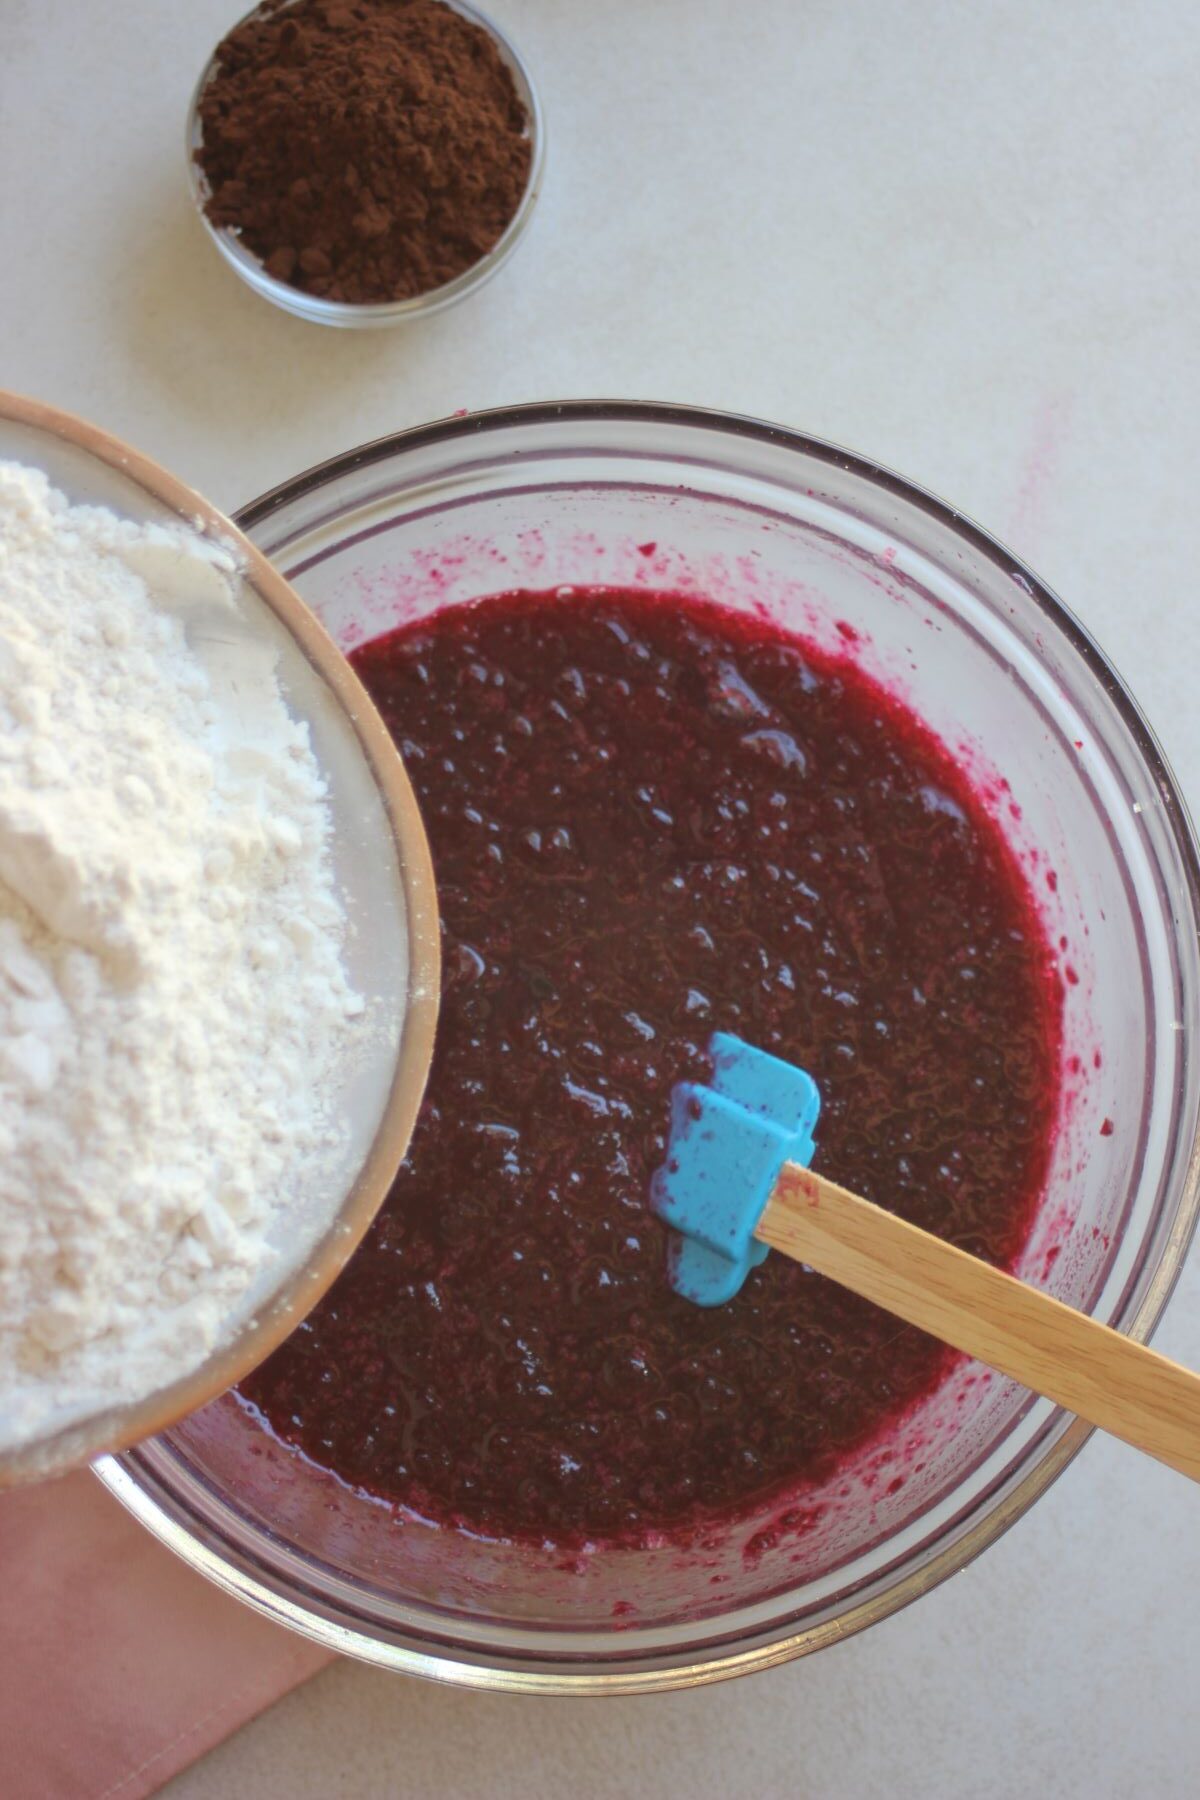 Plate with flour is about to be poured into a glass bowl with a red mixture.